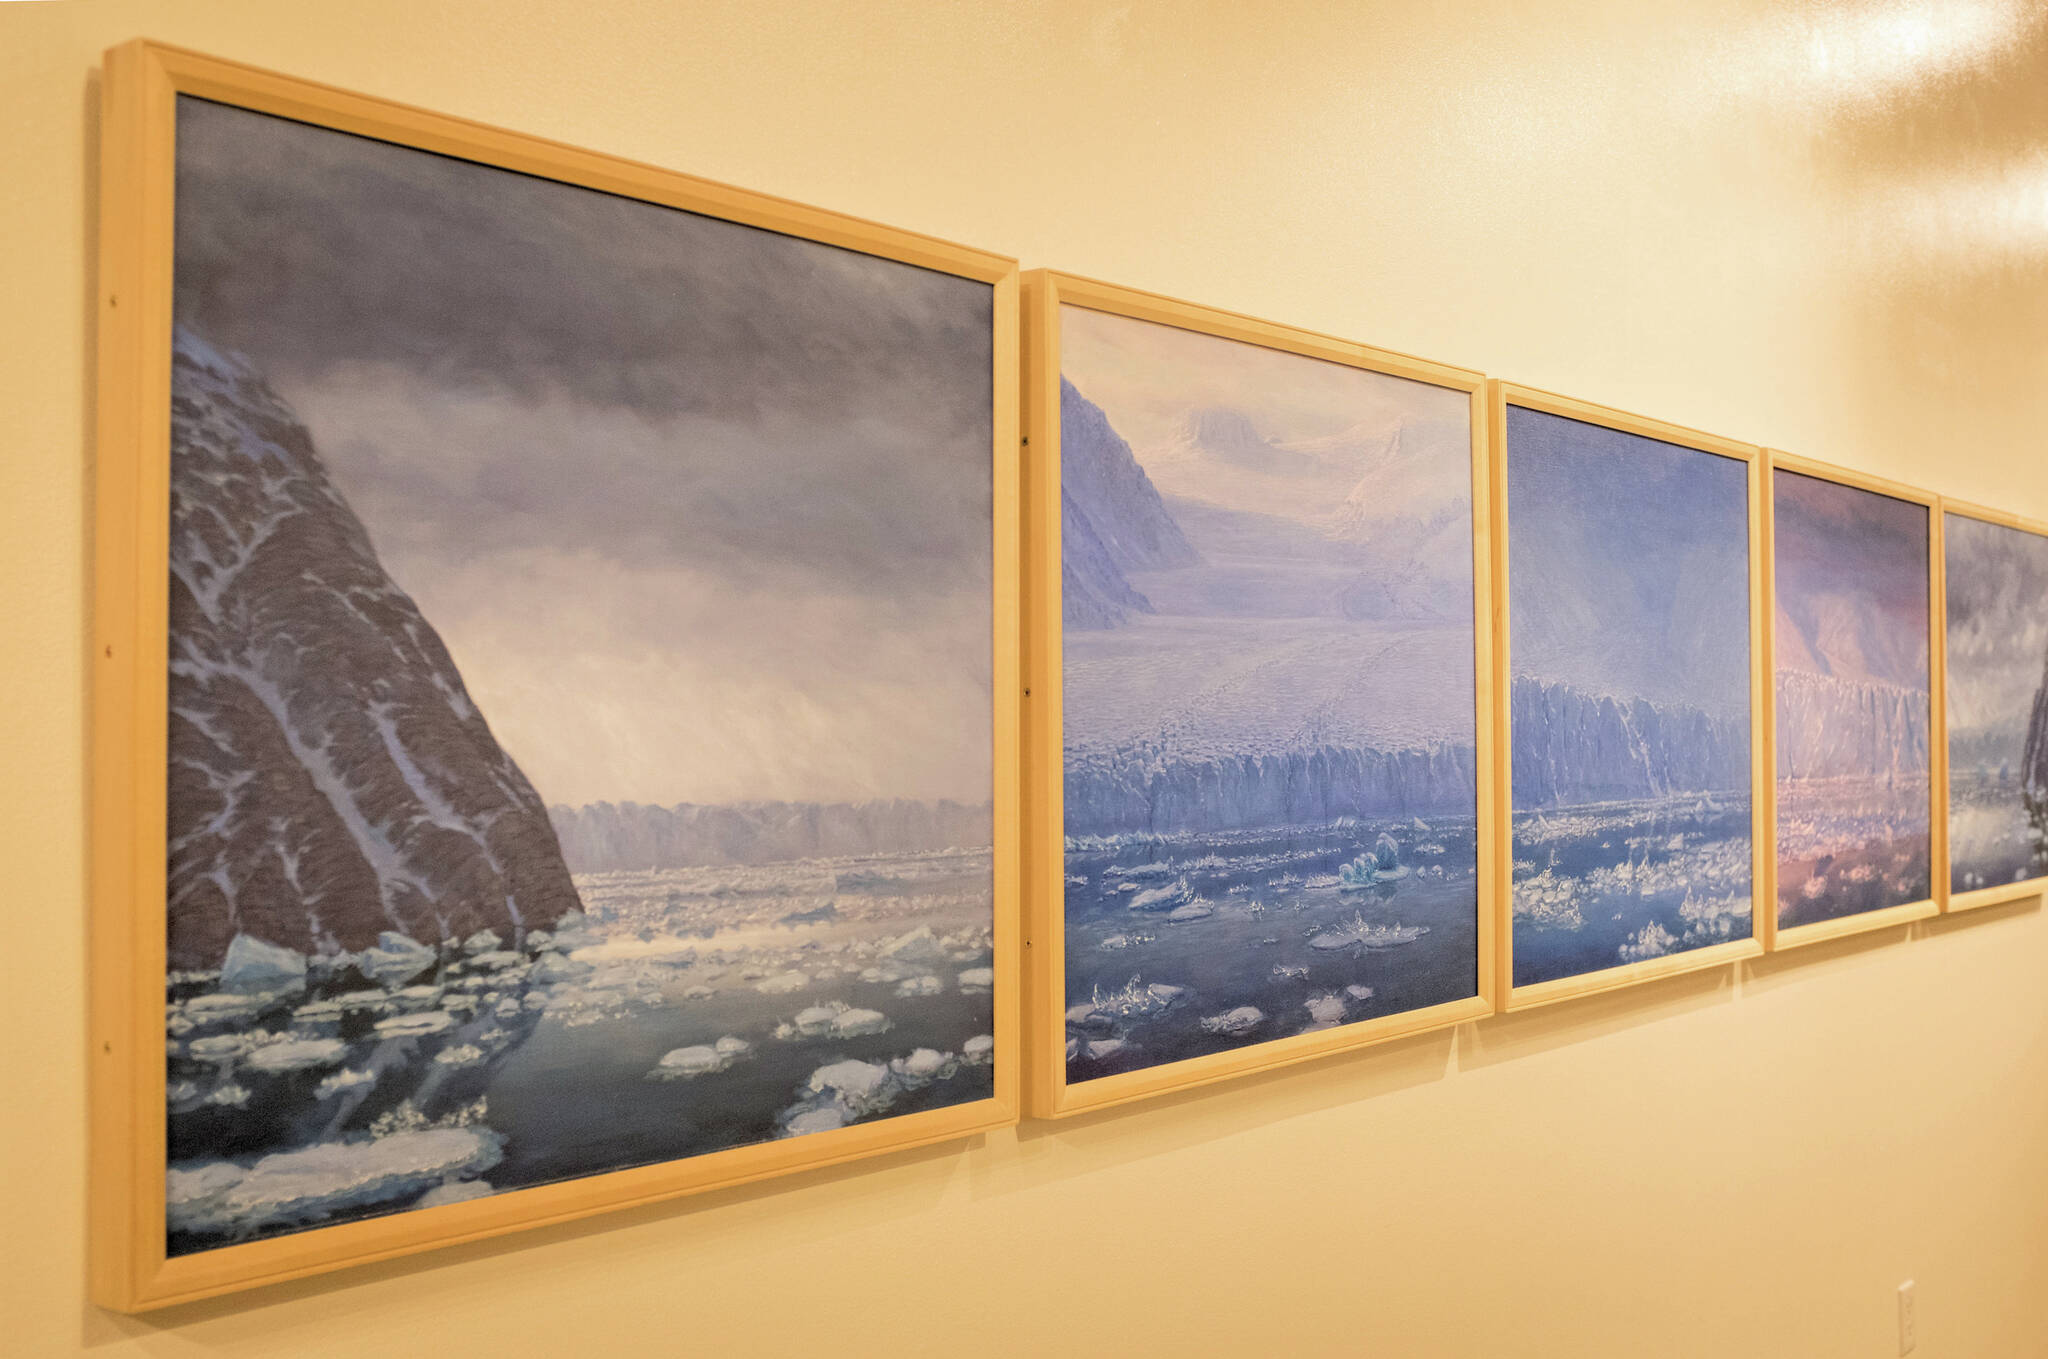 Photo by Sean McDermott 
A series of paintings of the Columbia Glacier, which David Rosenthal called “the poster child for glaciers and ice retreat.”